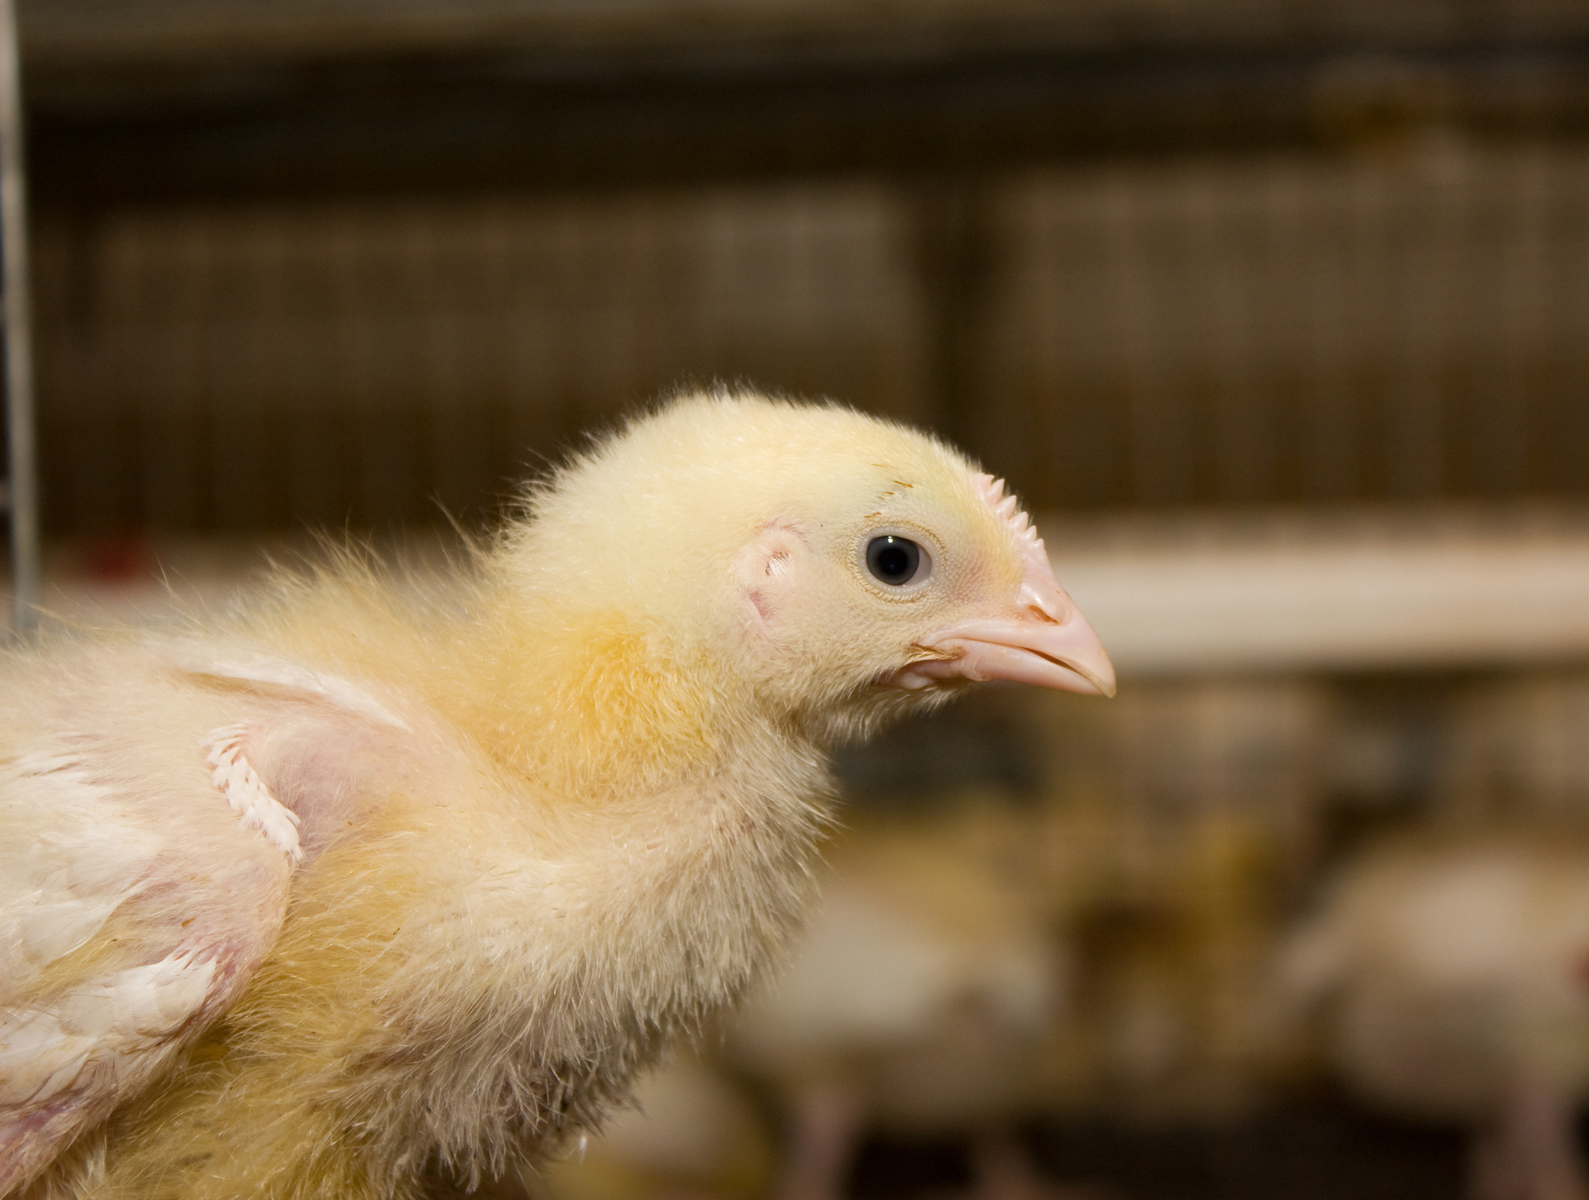 Butyrate to improve gut health in poultry